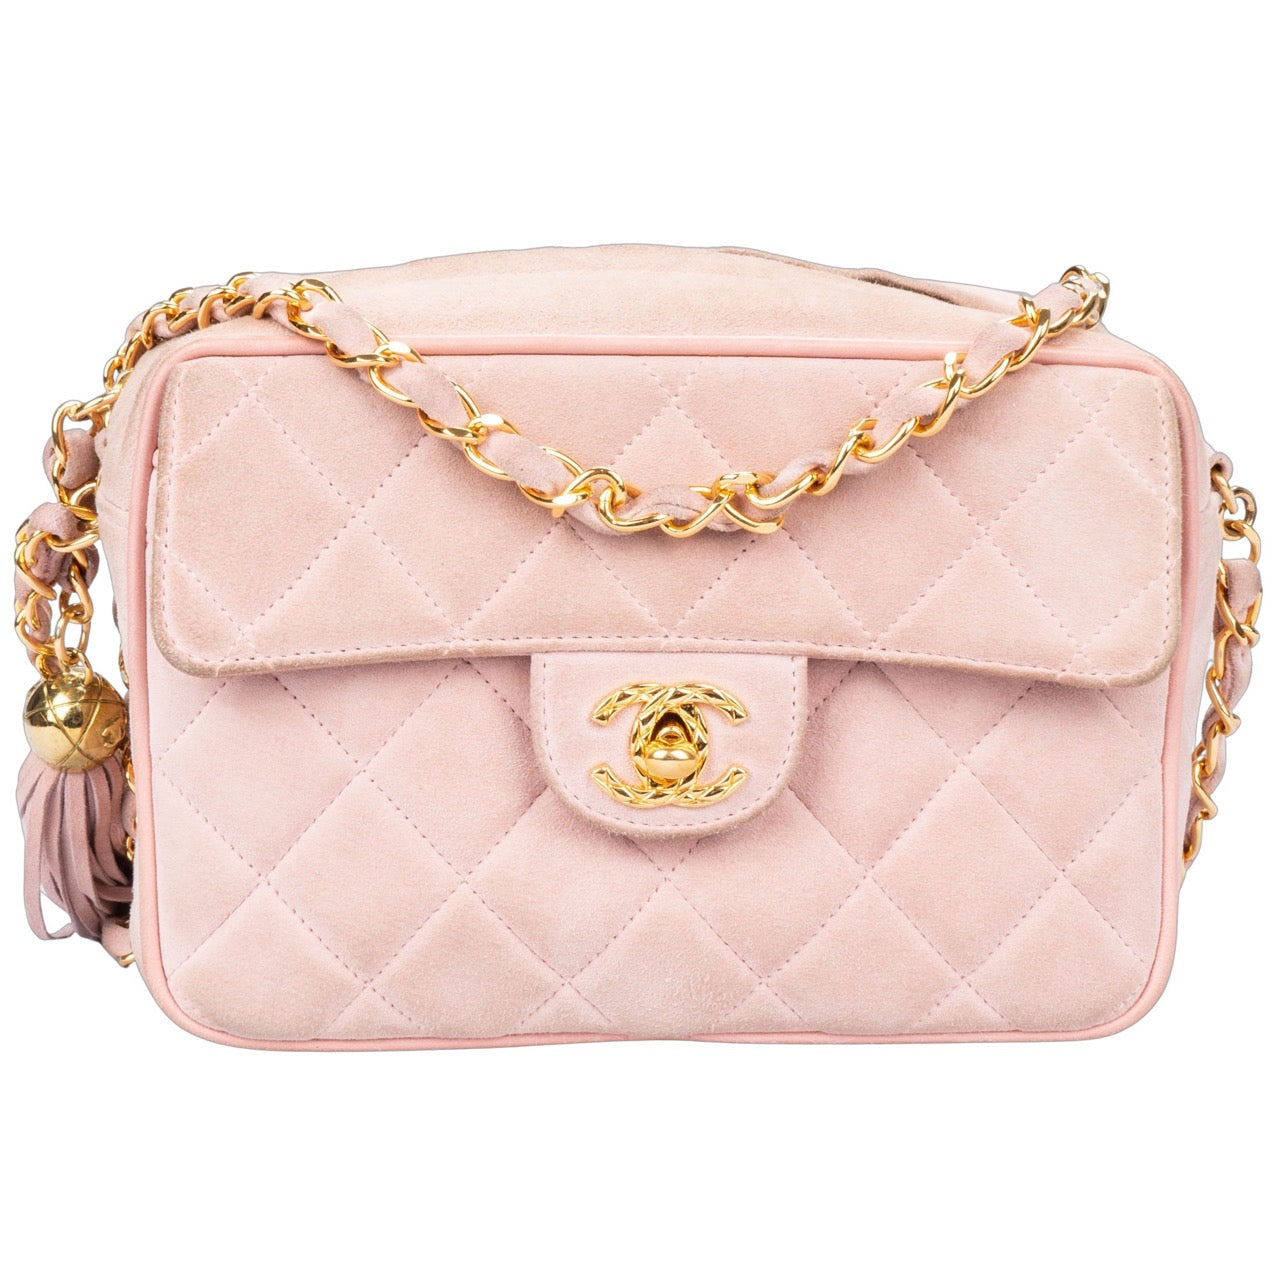 Chanel Quilted Suede Leather Camera Crossbody Bag